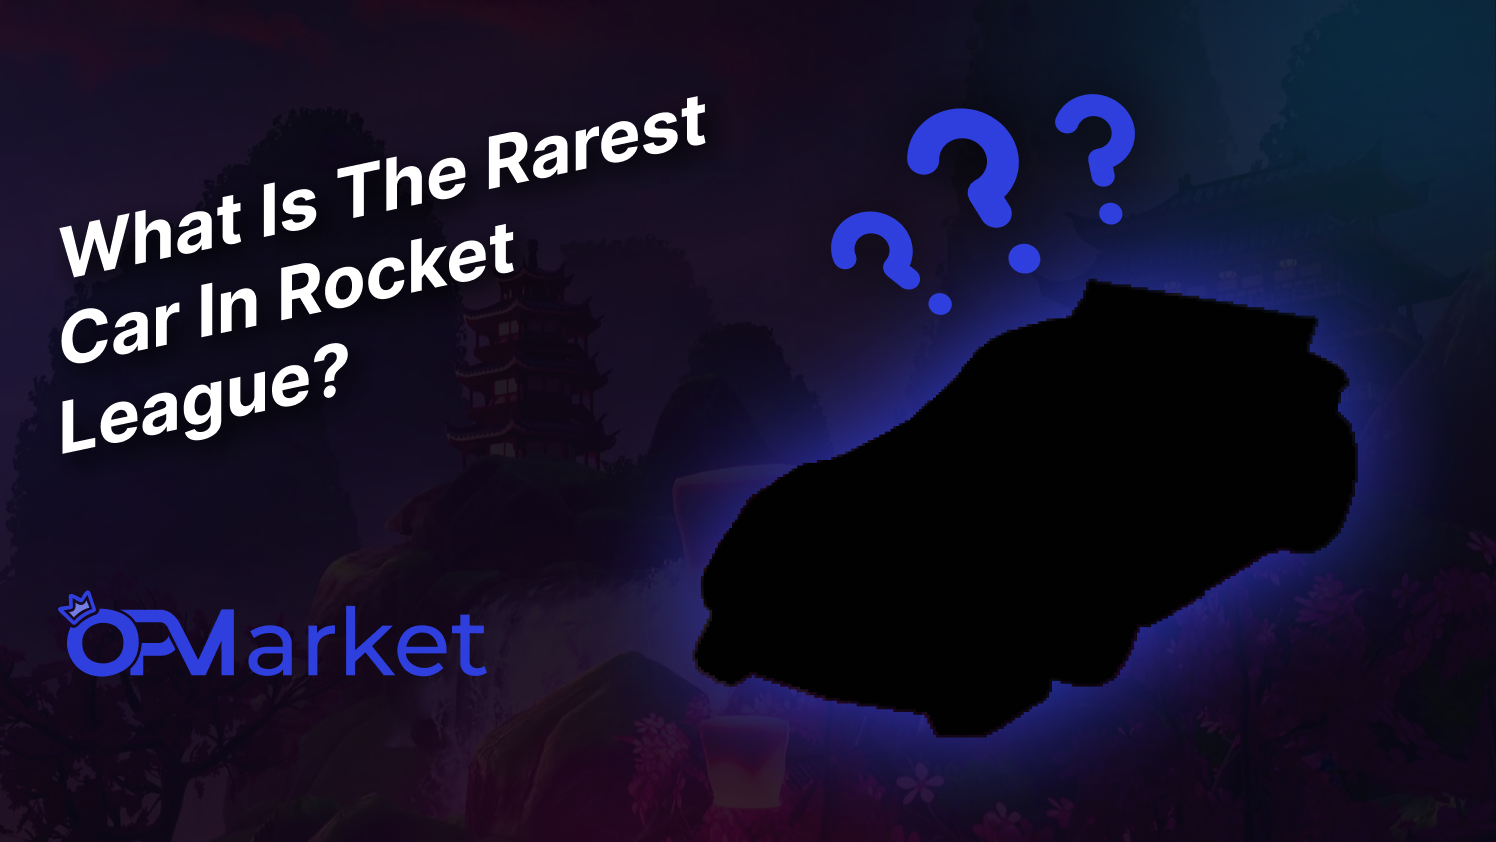 What Is The Rarest Car In Rocket League?